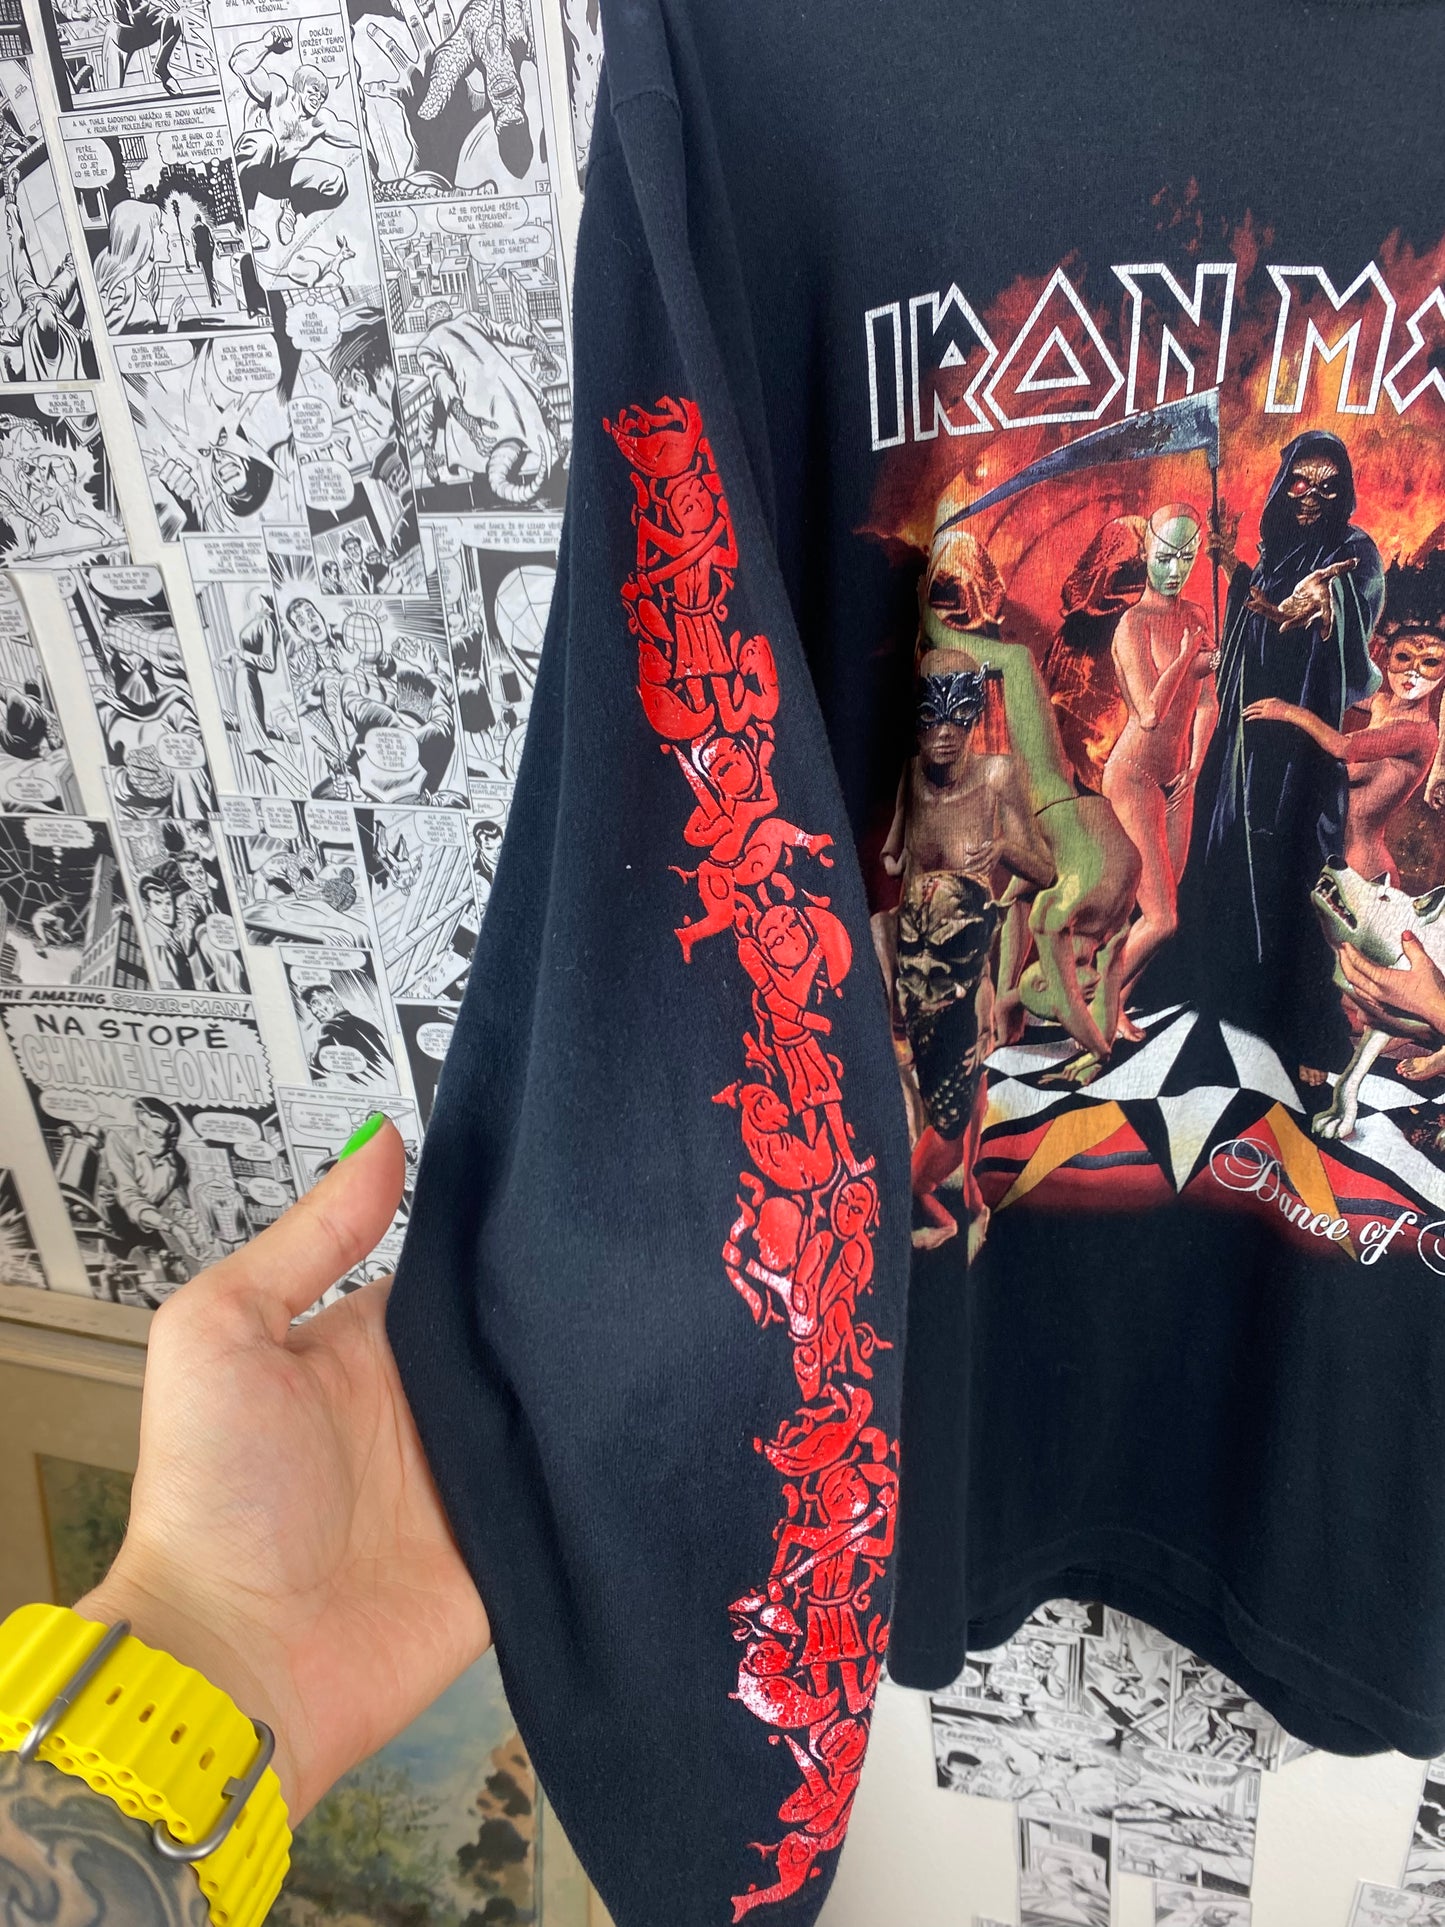 Vintage Iron Maiden “Dance of the Death” T-shirt - size M